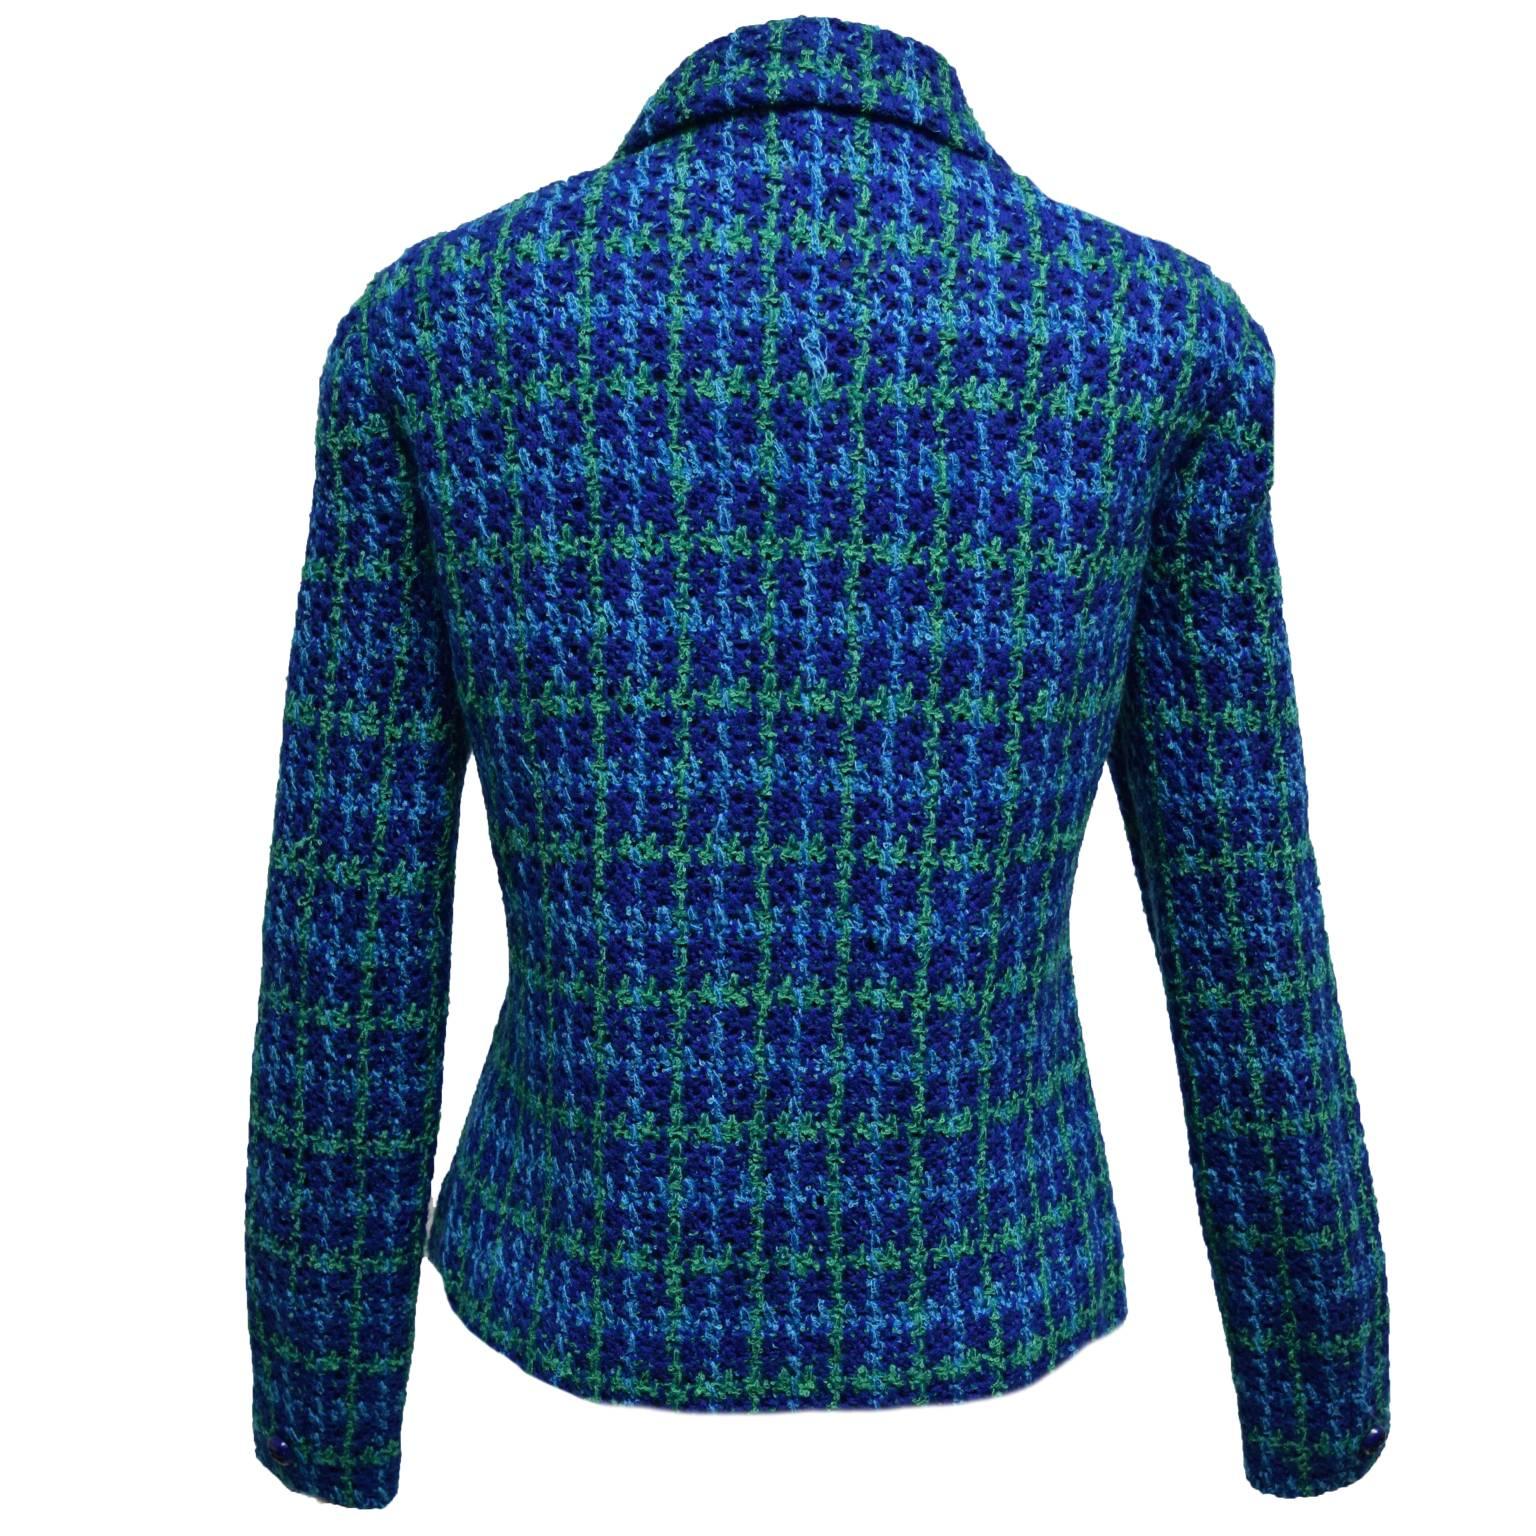 Women's Murell Blue, Navy, and Green Crocheted Jacket and Dress Ensemble  For Sale